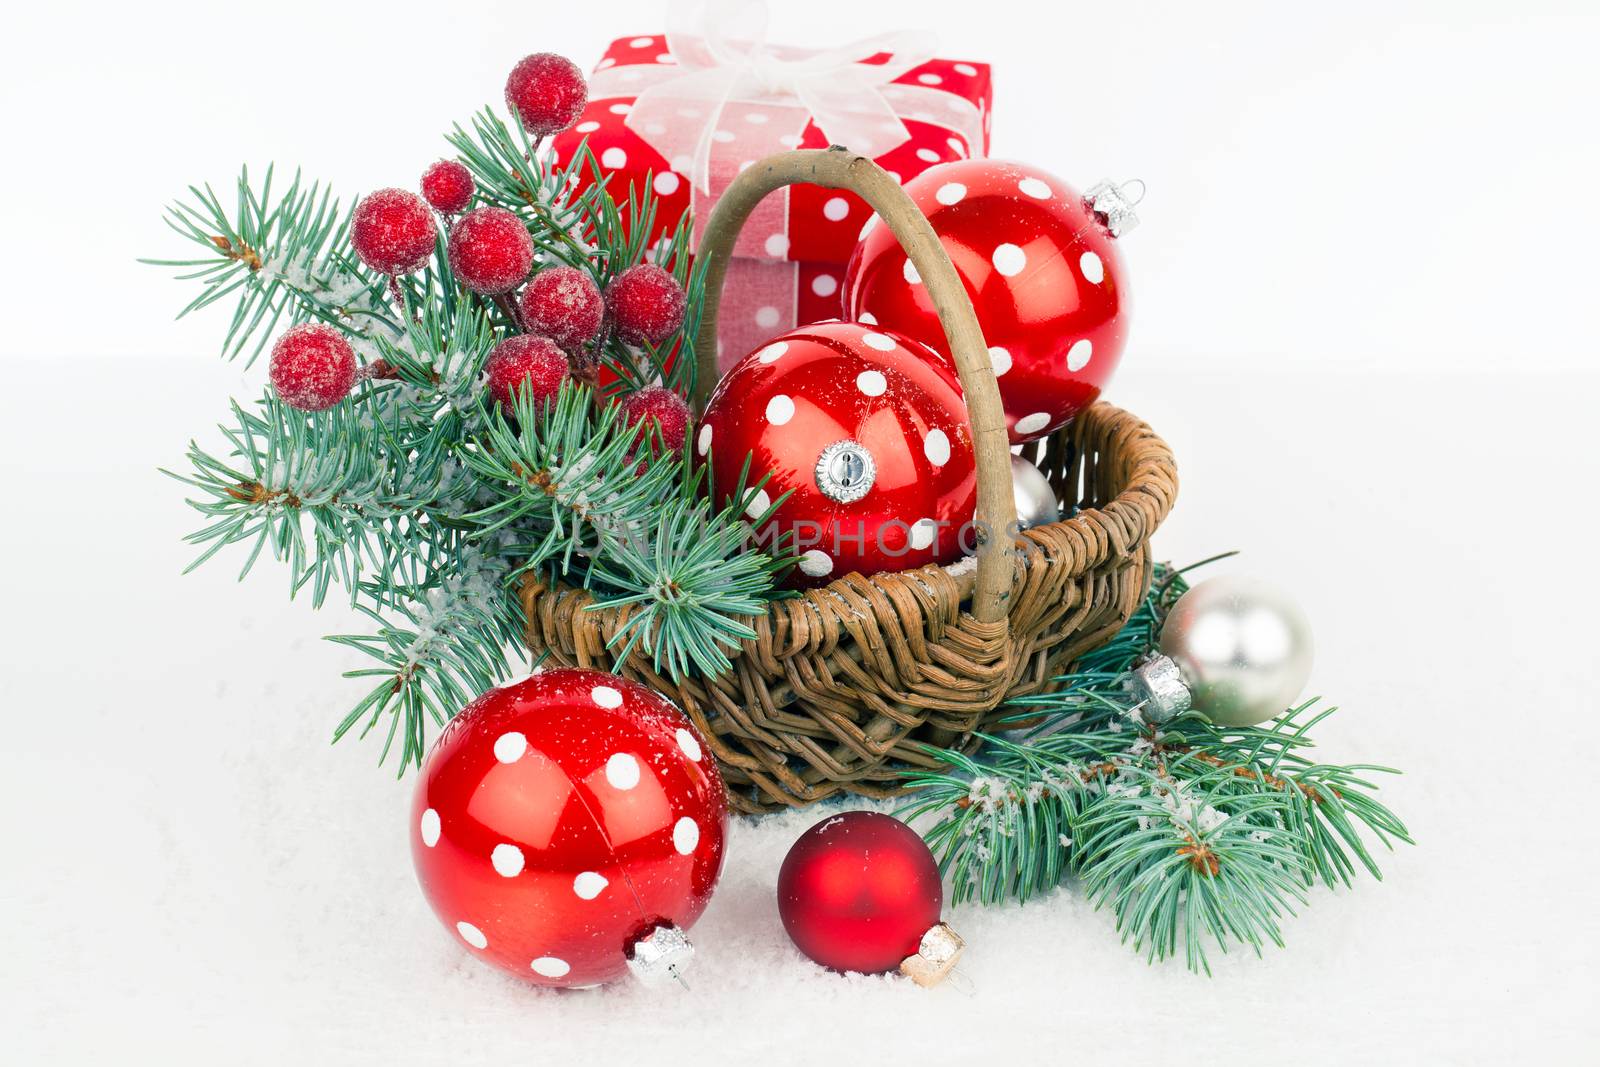 Christmas balls and fir branches with decorations isolated over white